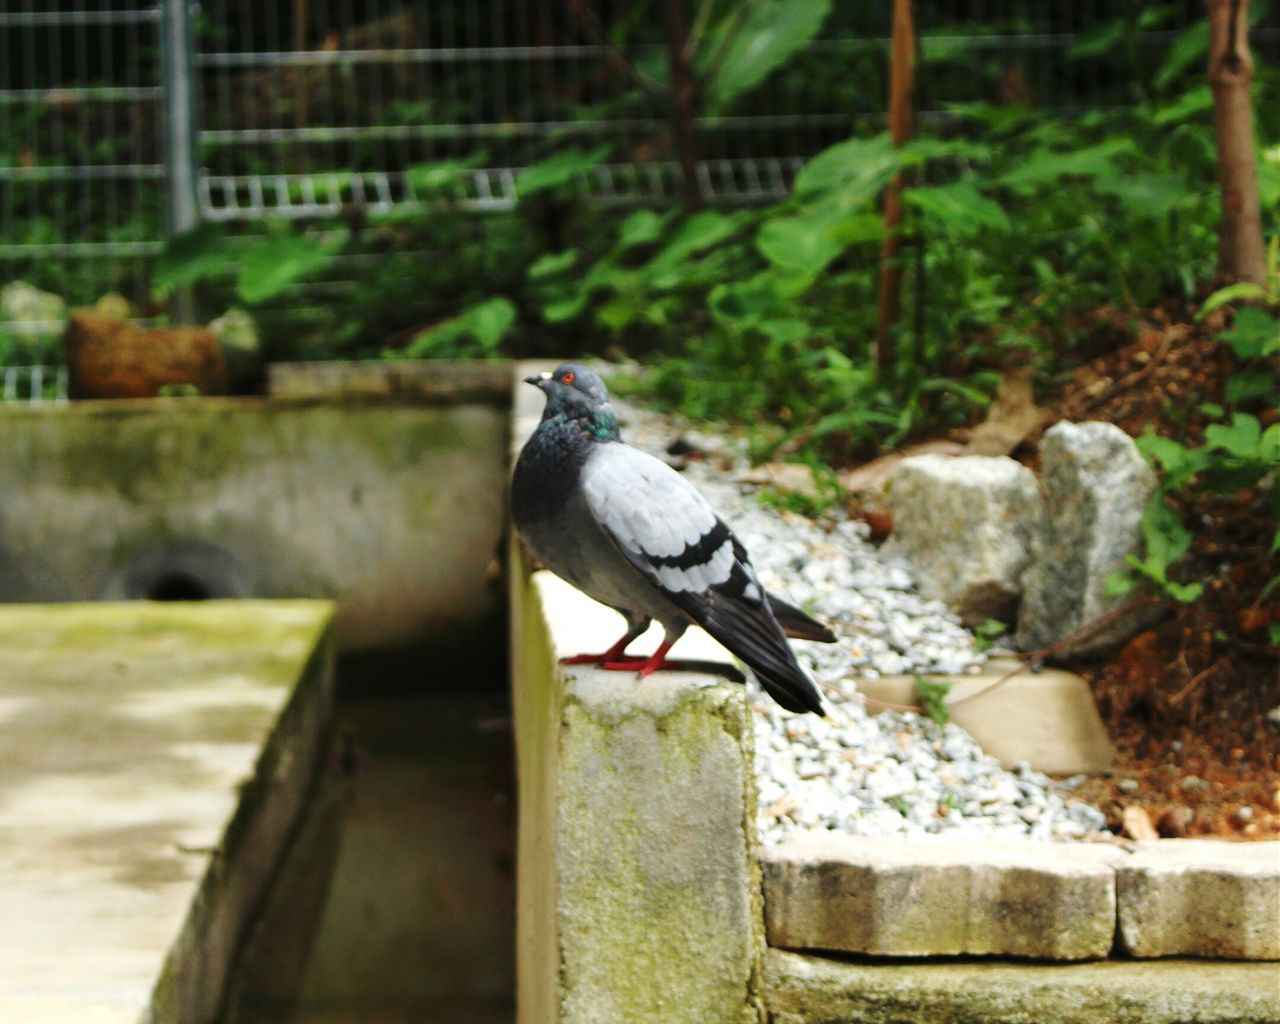 bird, one animal, animal themes, animals in the wild, wildlife, focus on foreground, perching, close-up, day, outdoors, nature, side view, pigeon, wood - material, full length, no people, black color, retaining wall, selective focus, bench